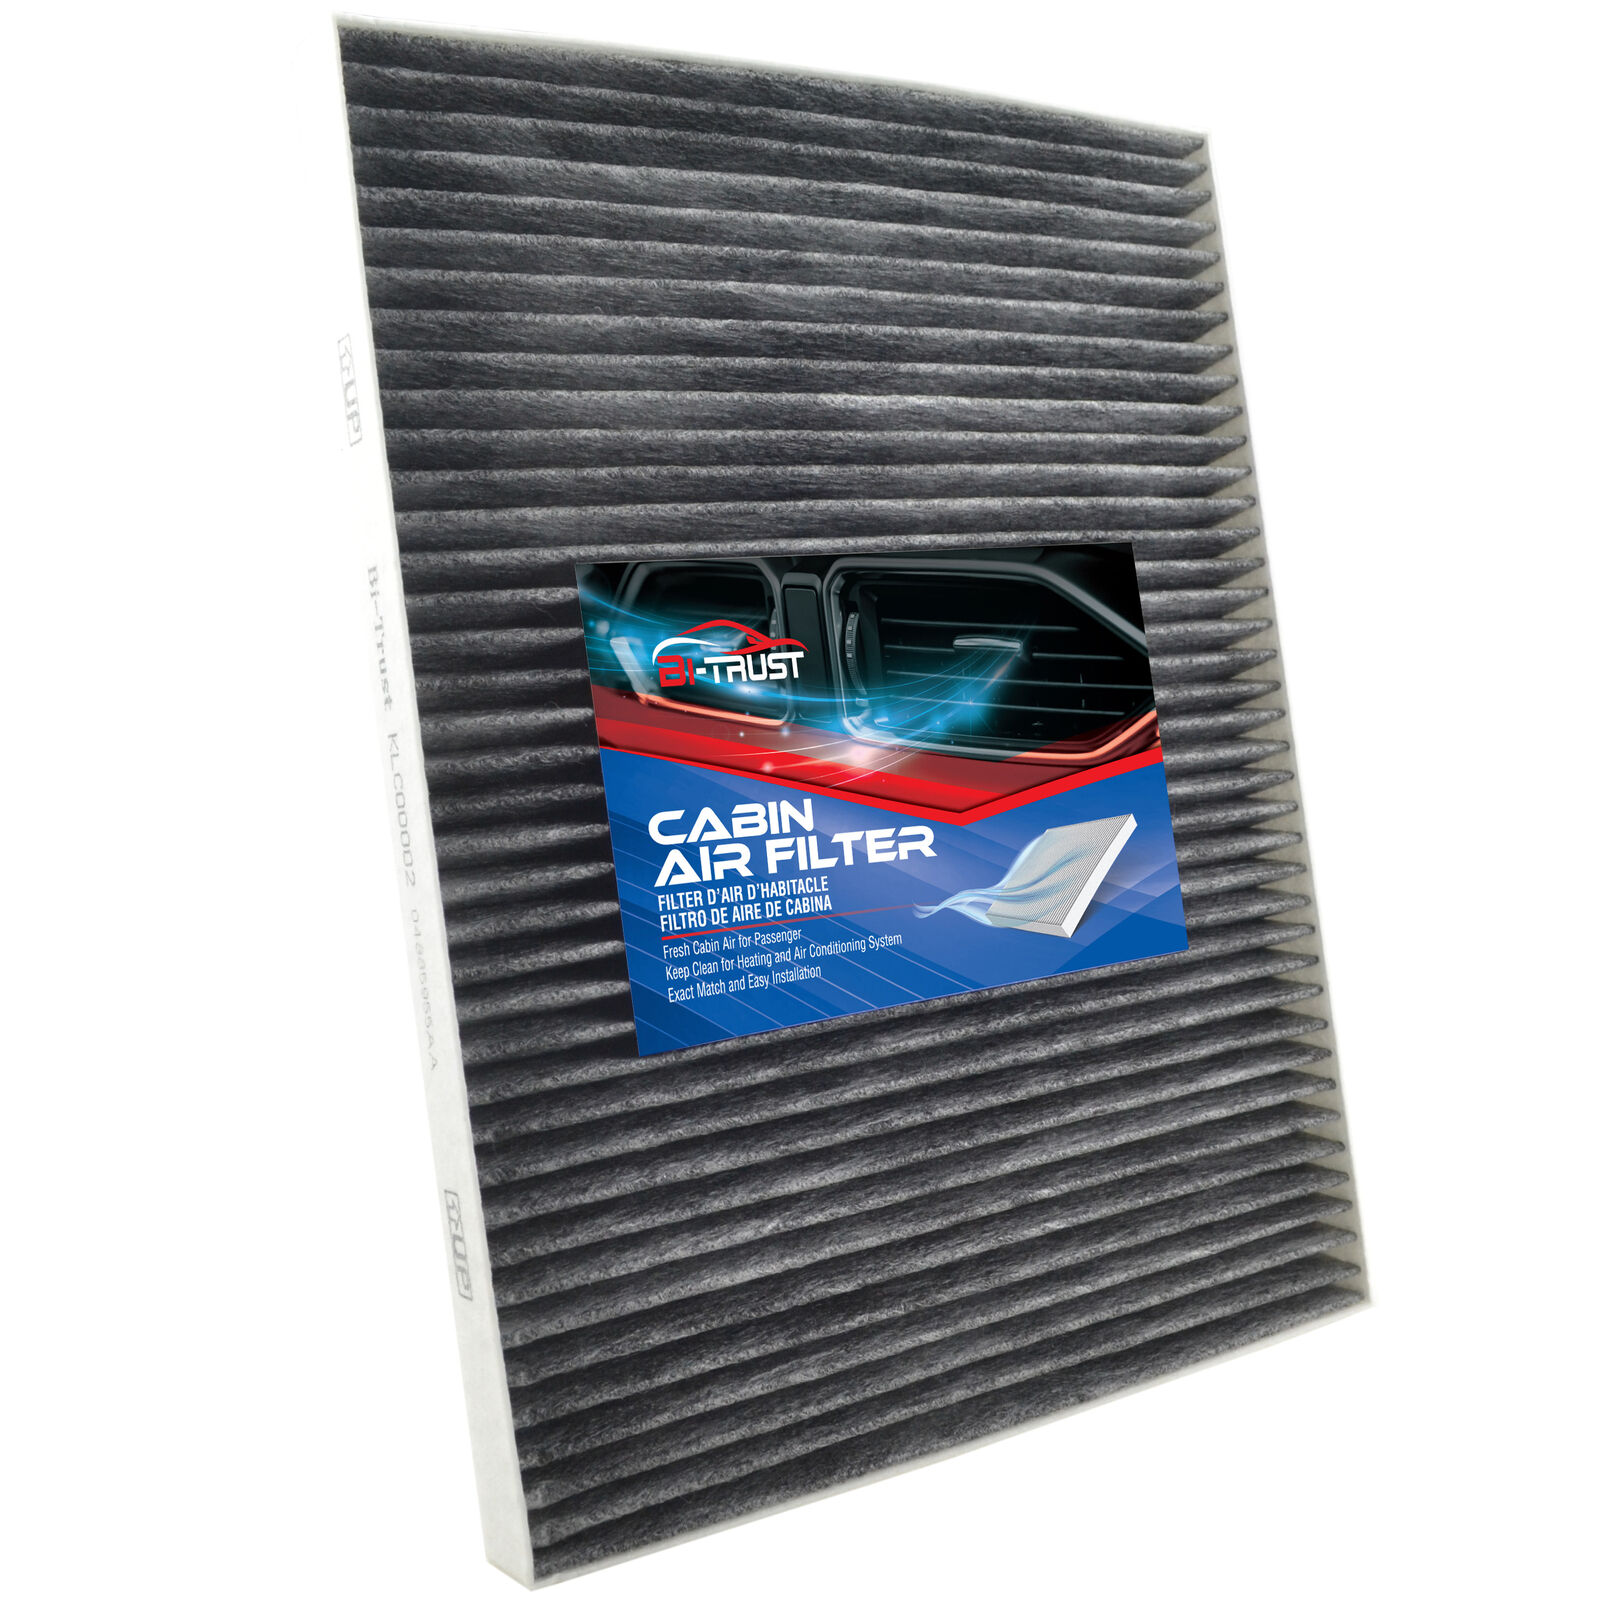 Cabin Air Filter Chrysler Grand Voyager Pacifica Town & Country Dodge Caravan